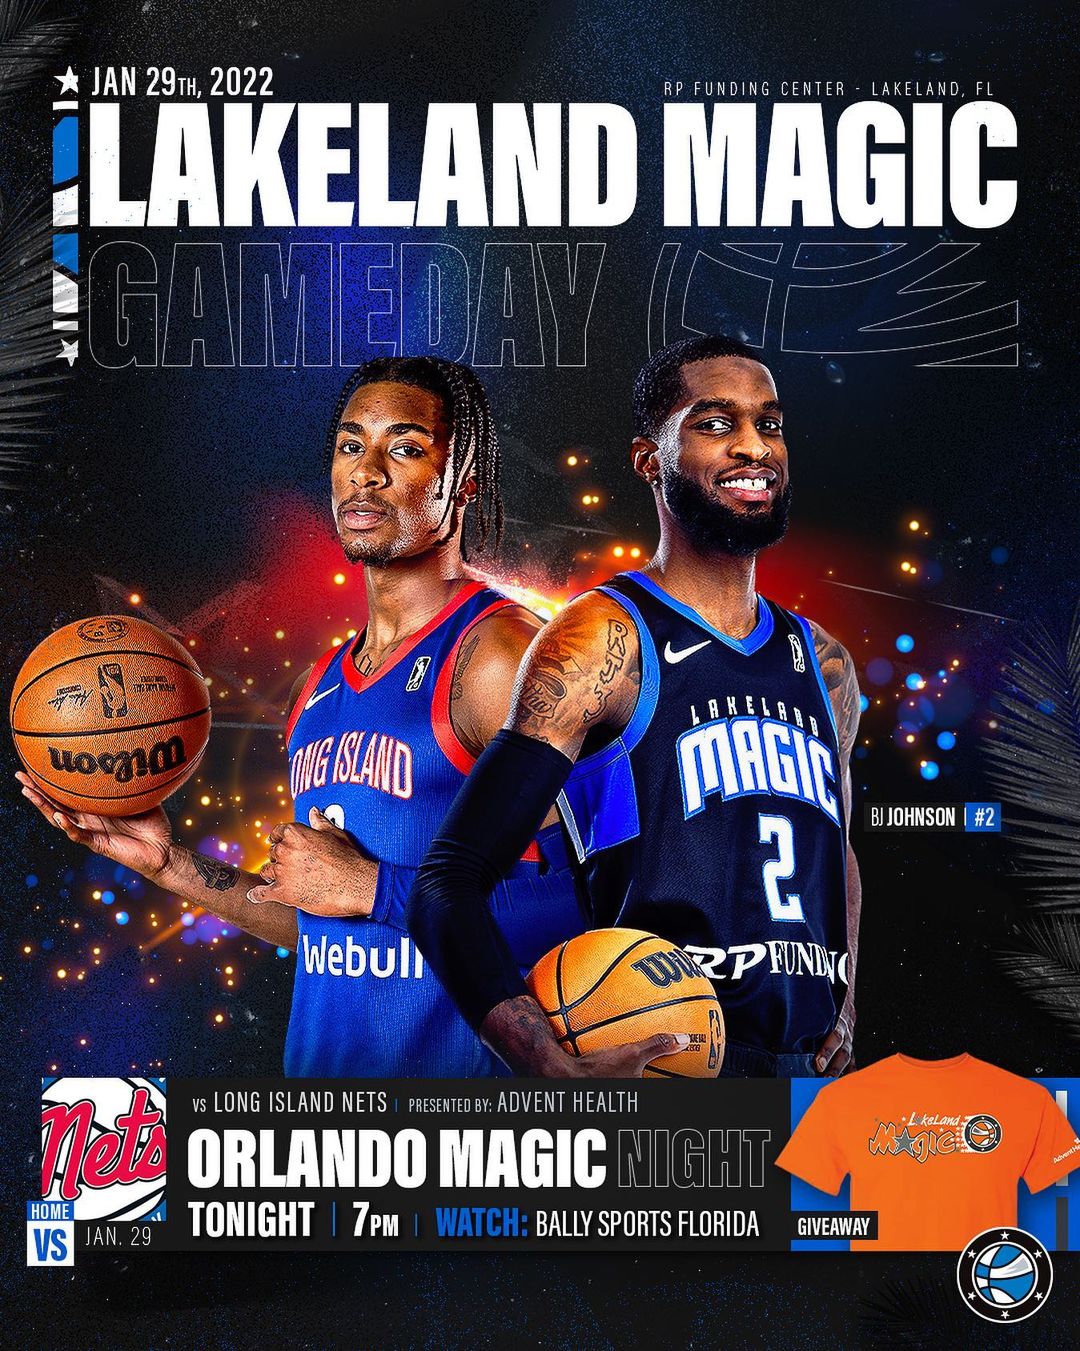 Join us for Orlando Magic Night presented by @adventhealth as your #NBAGLeague C...